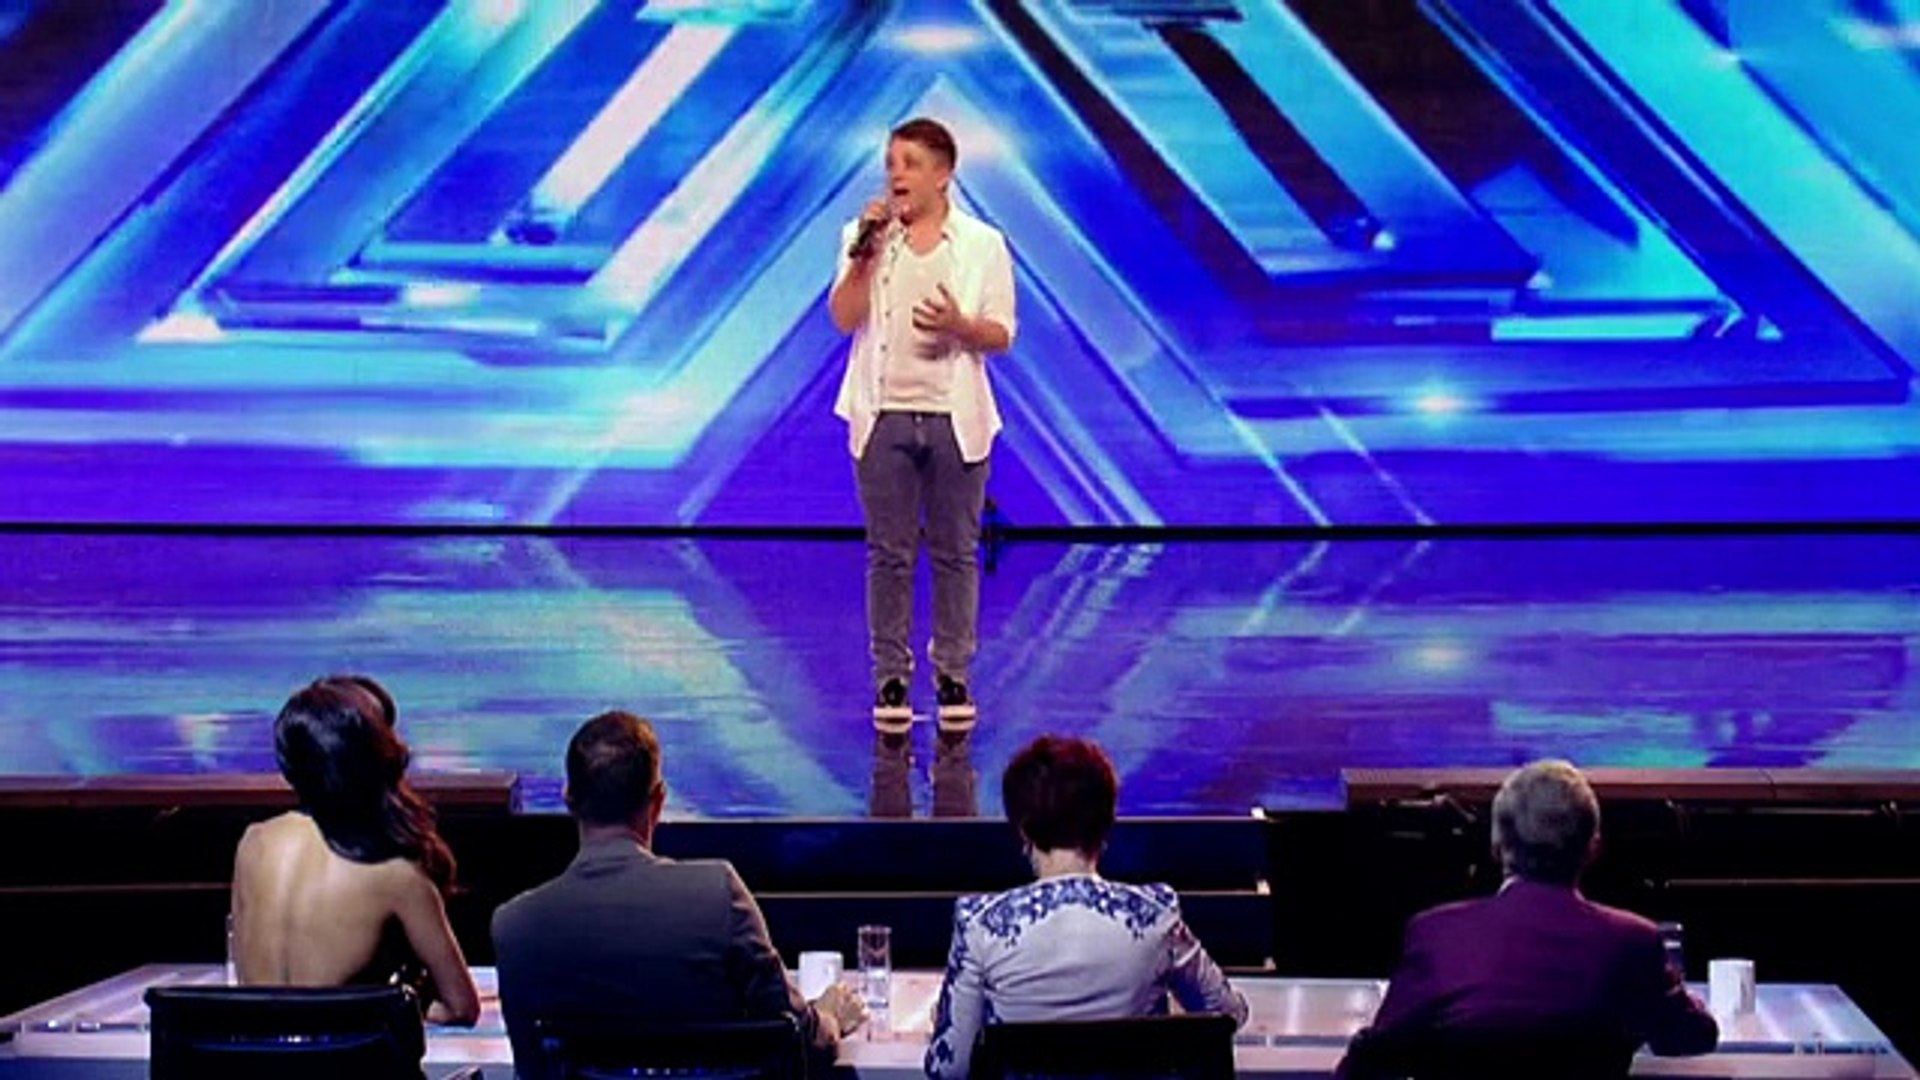 â�£Nicholas McDonald sings A Thousand Years - Arena Auditions Week 3 - The X Factor 2013 - Official Cha